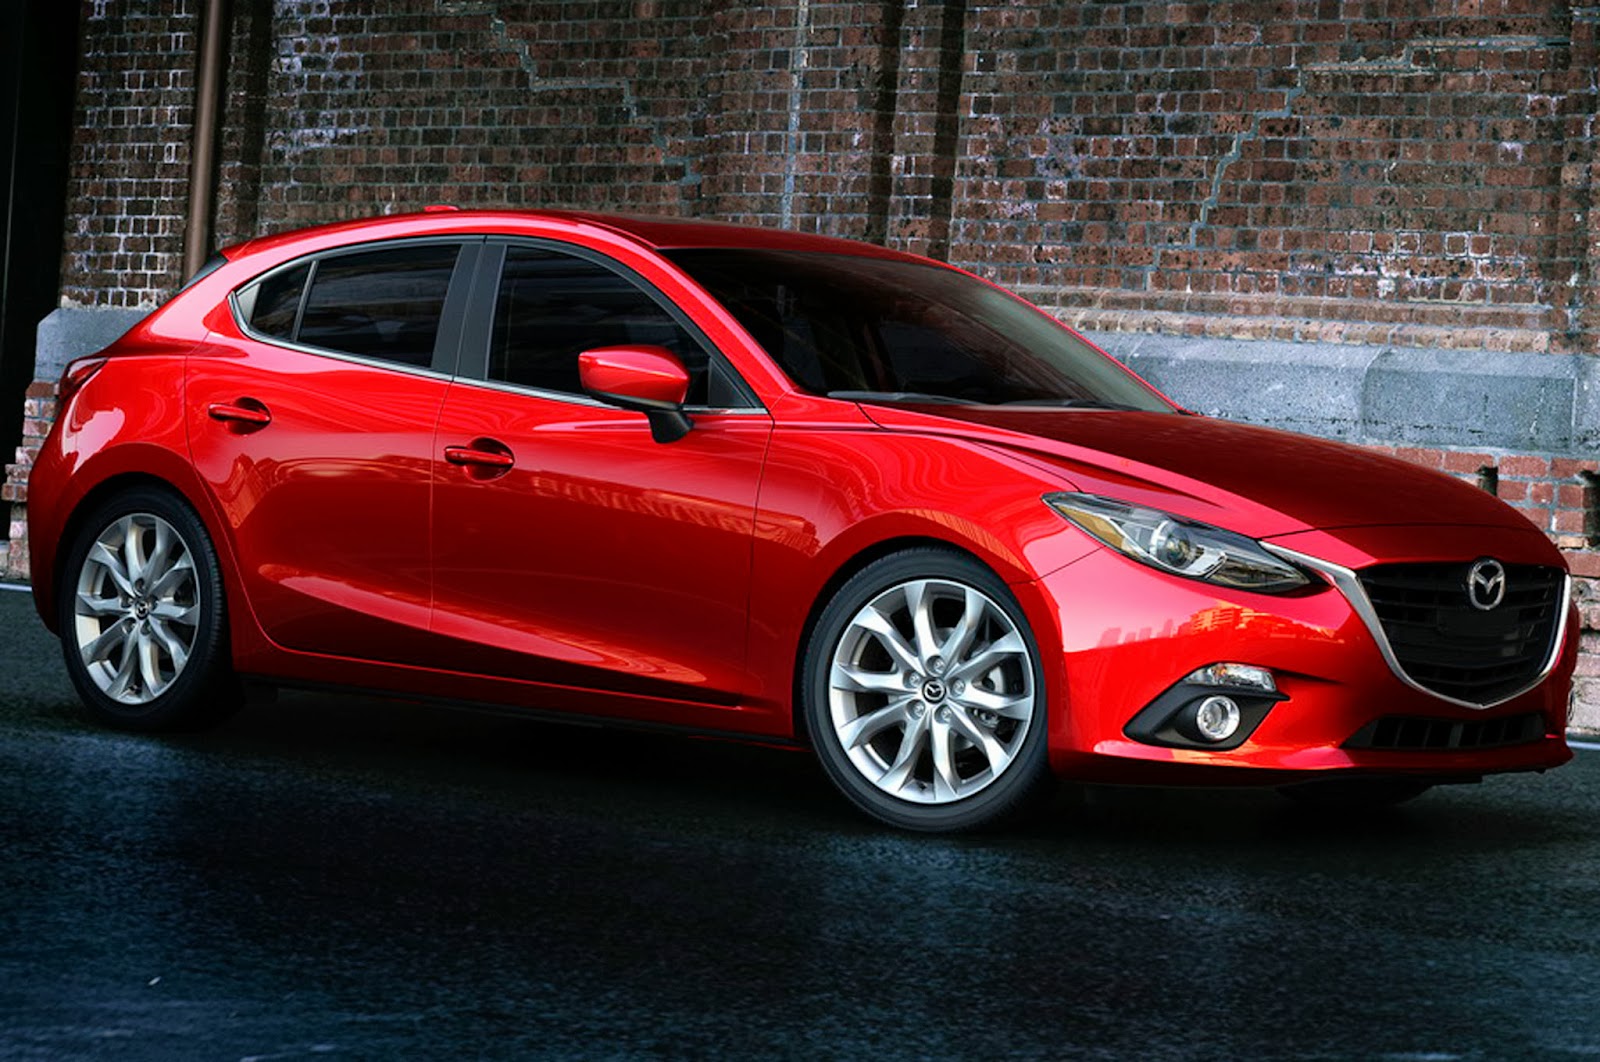 2014 Mazda 3 Reviews Ratings Prices  Consumer Reports